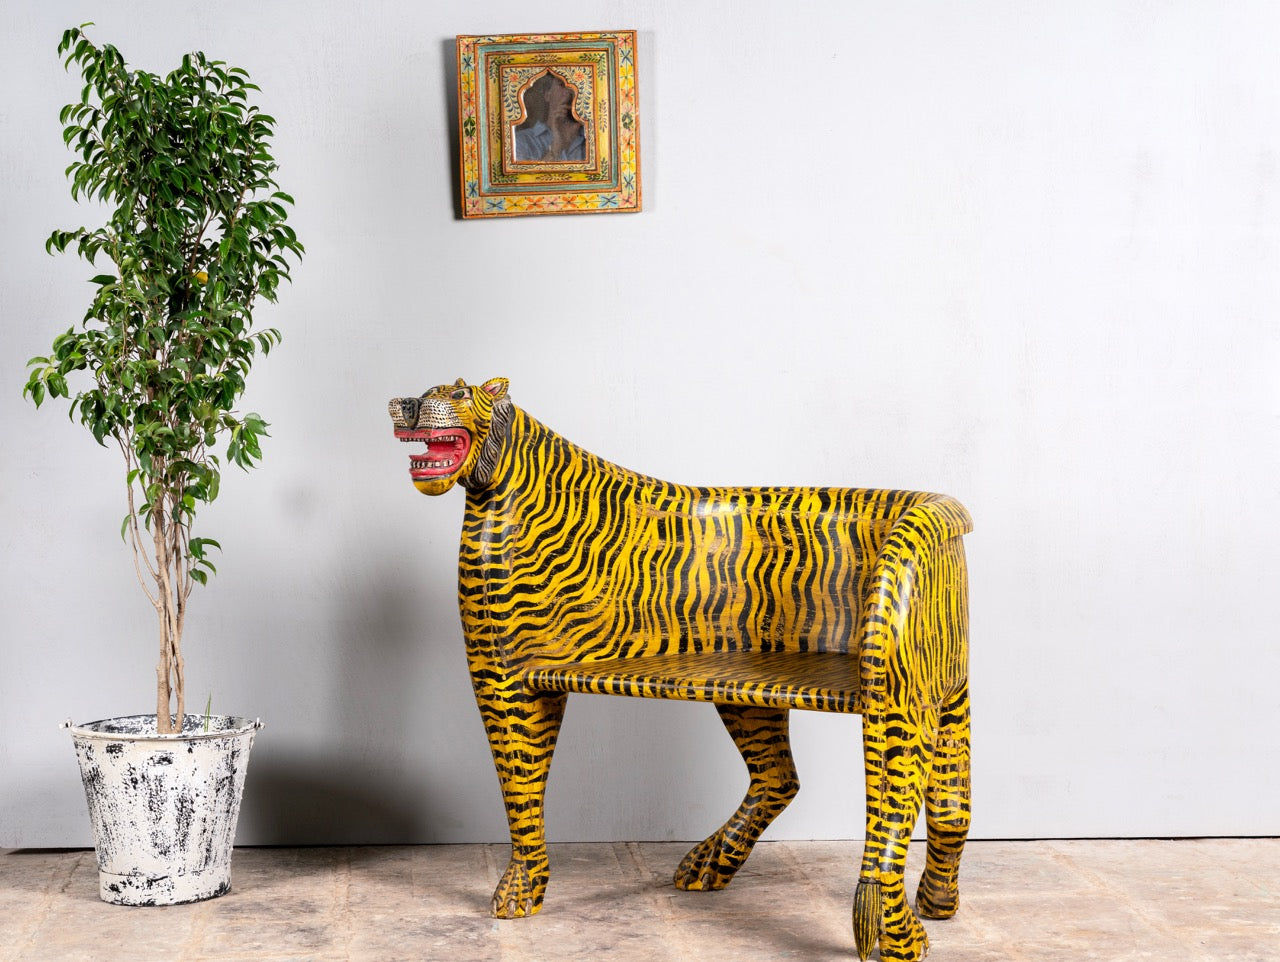 Tiger chair, indian-style home decor